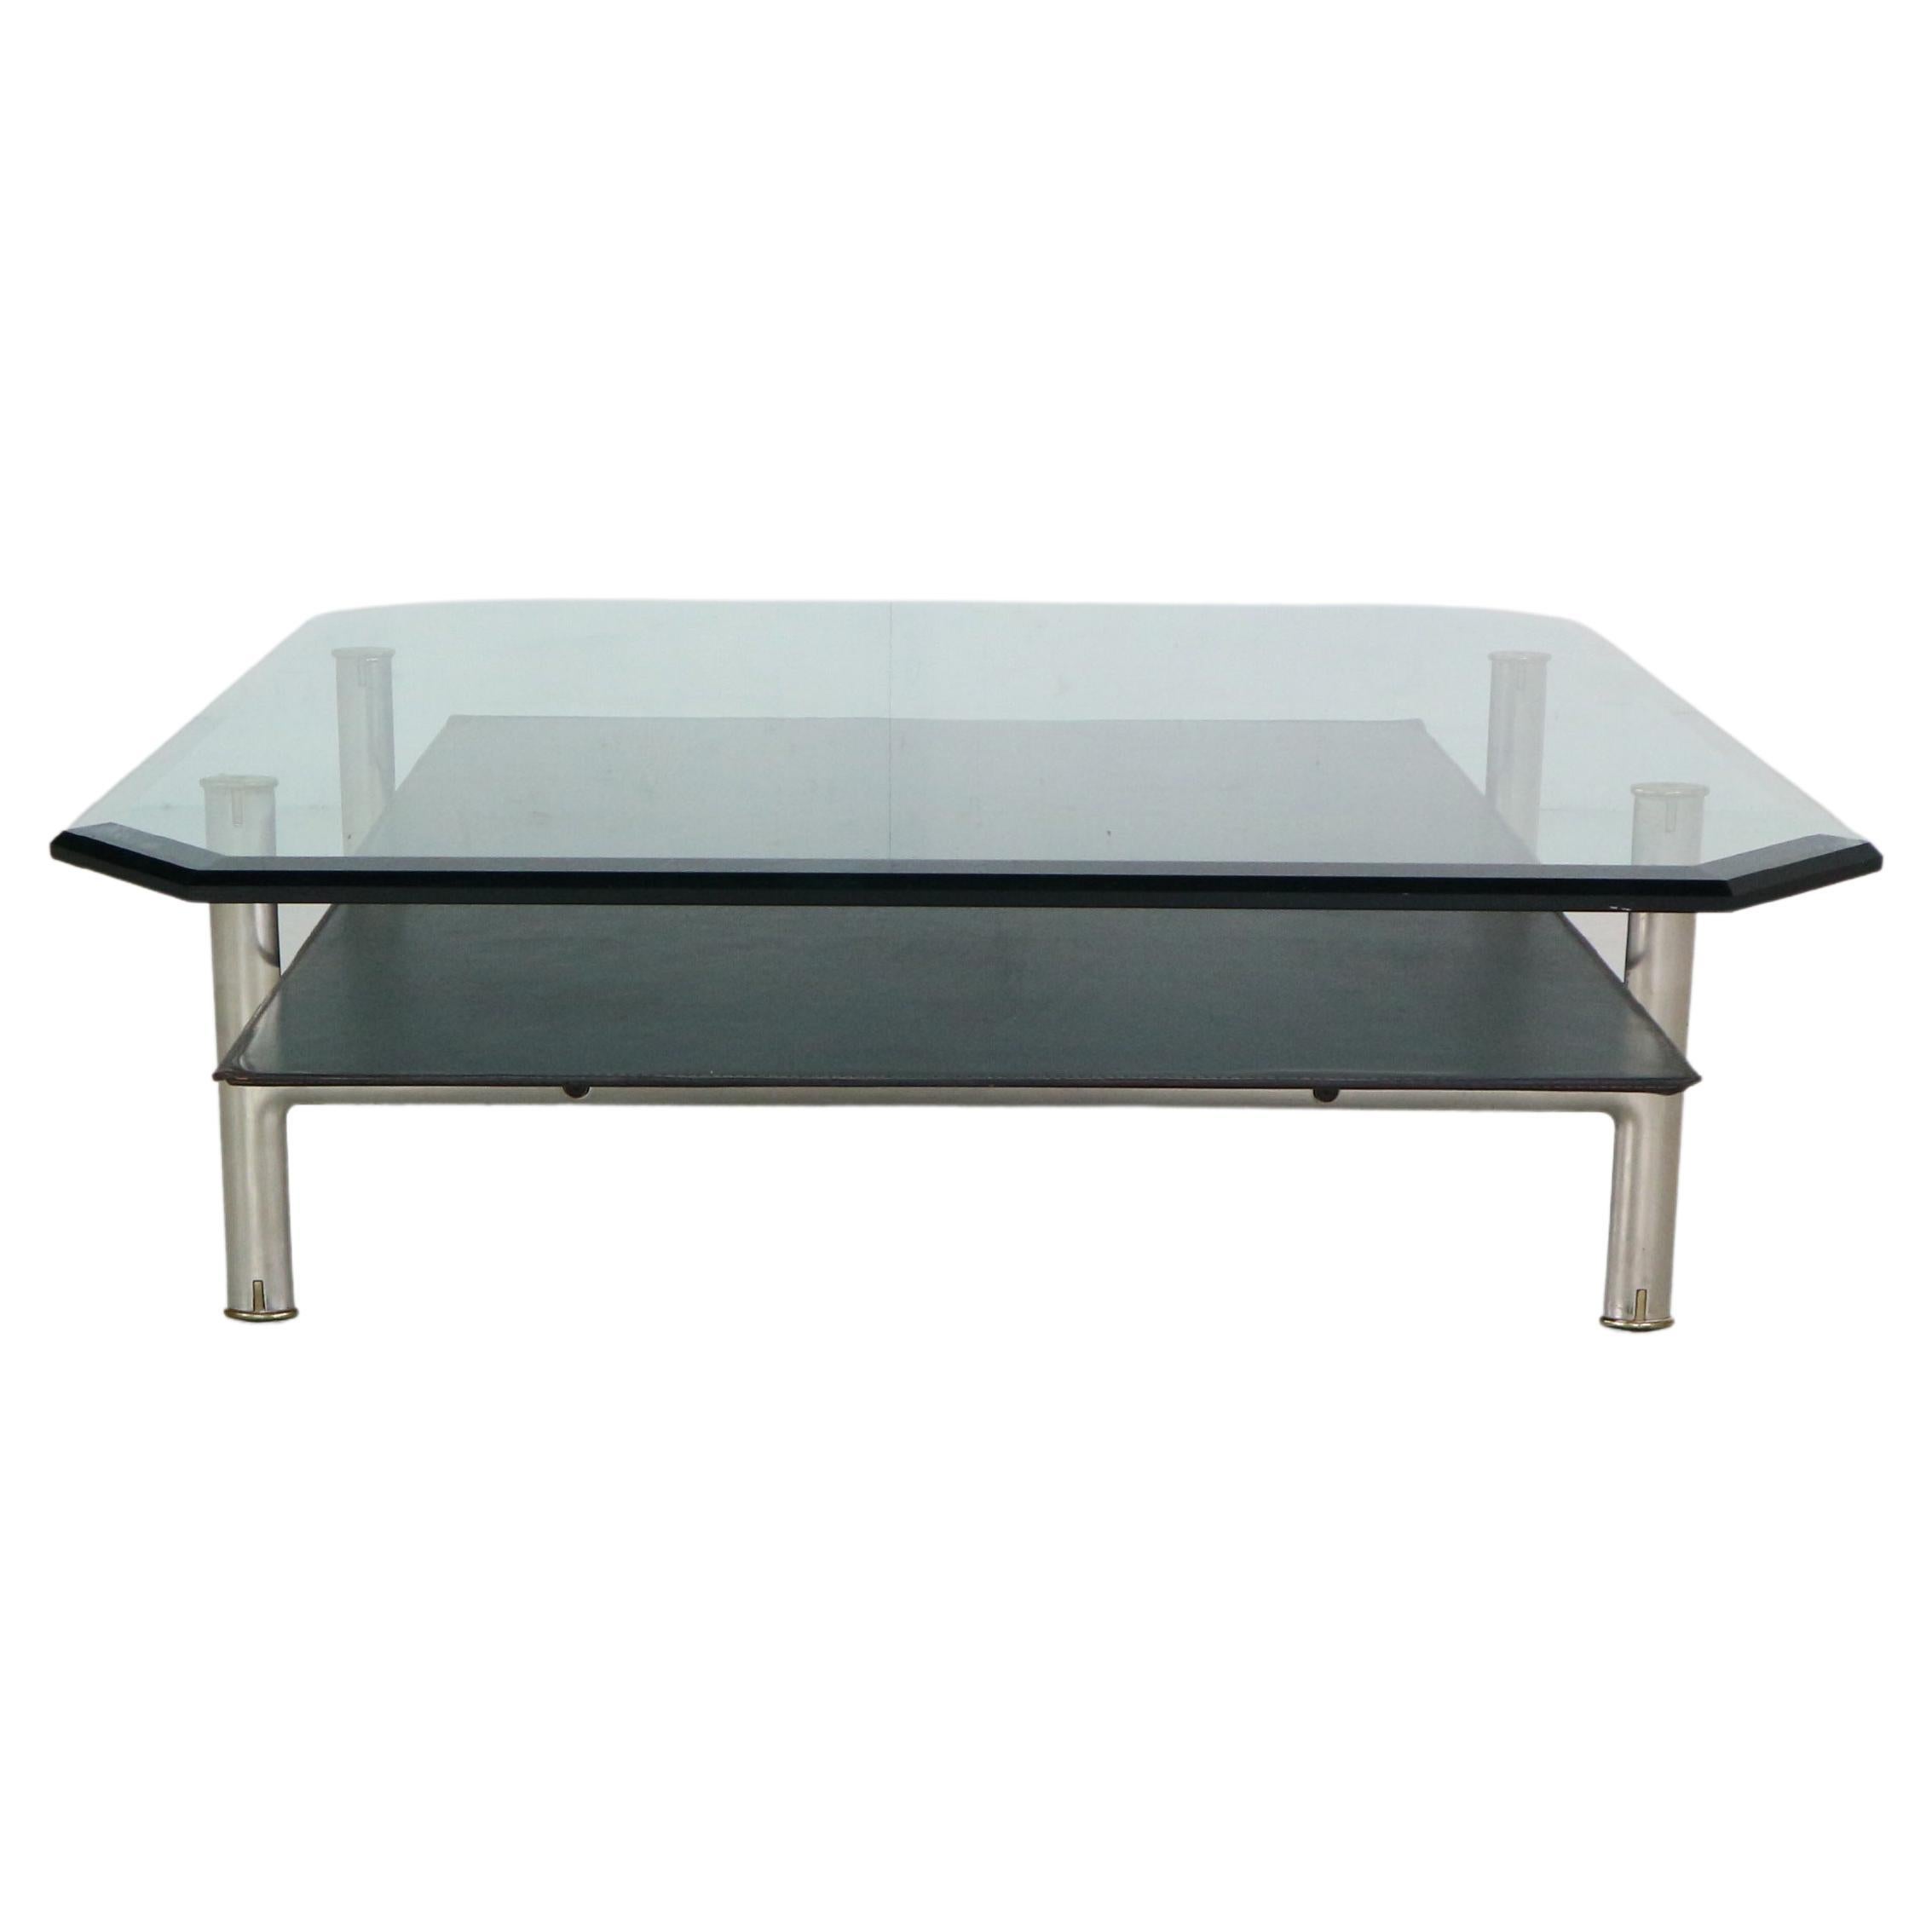 B&B Italia 'Diesis' Two-Tier Glass and Leather Coffee Table by Antonio Citterio 